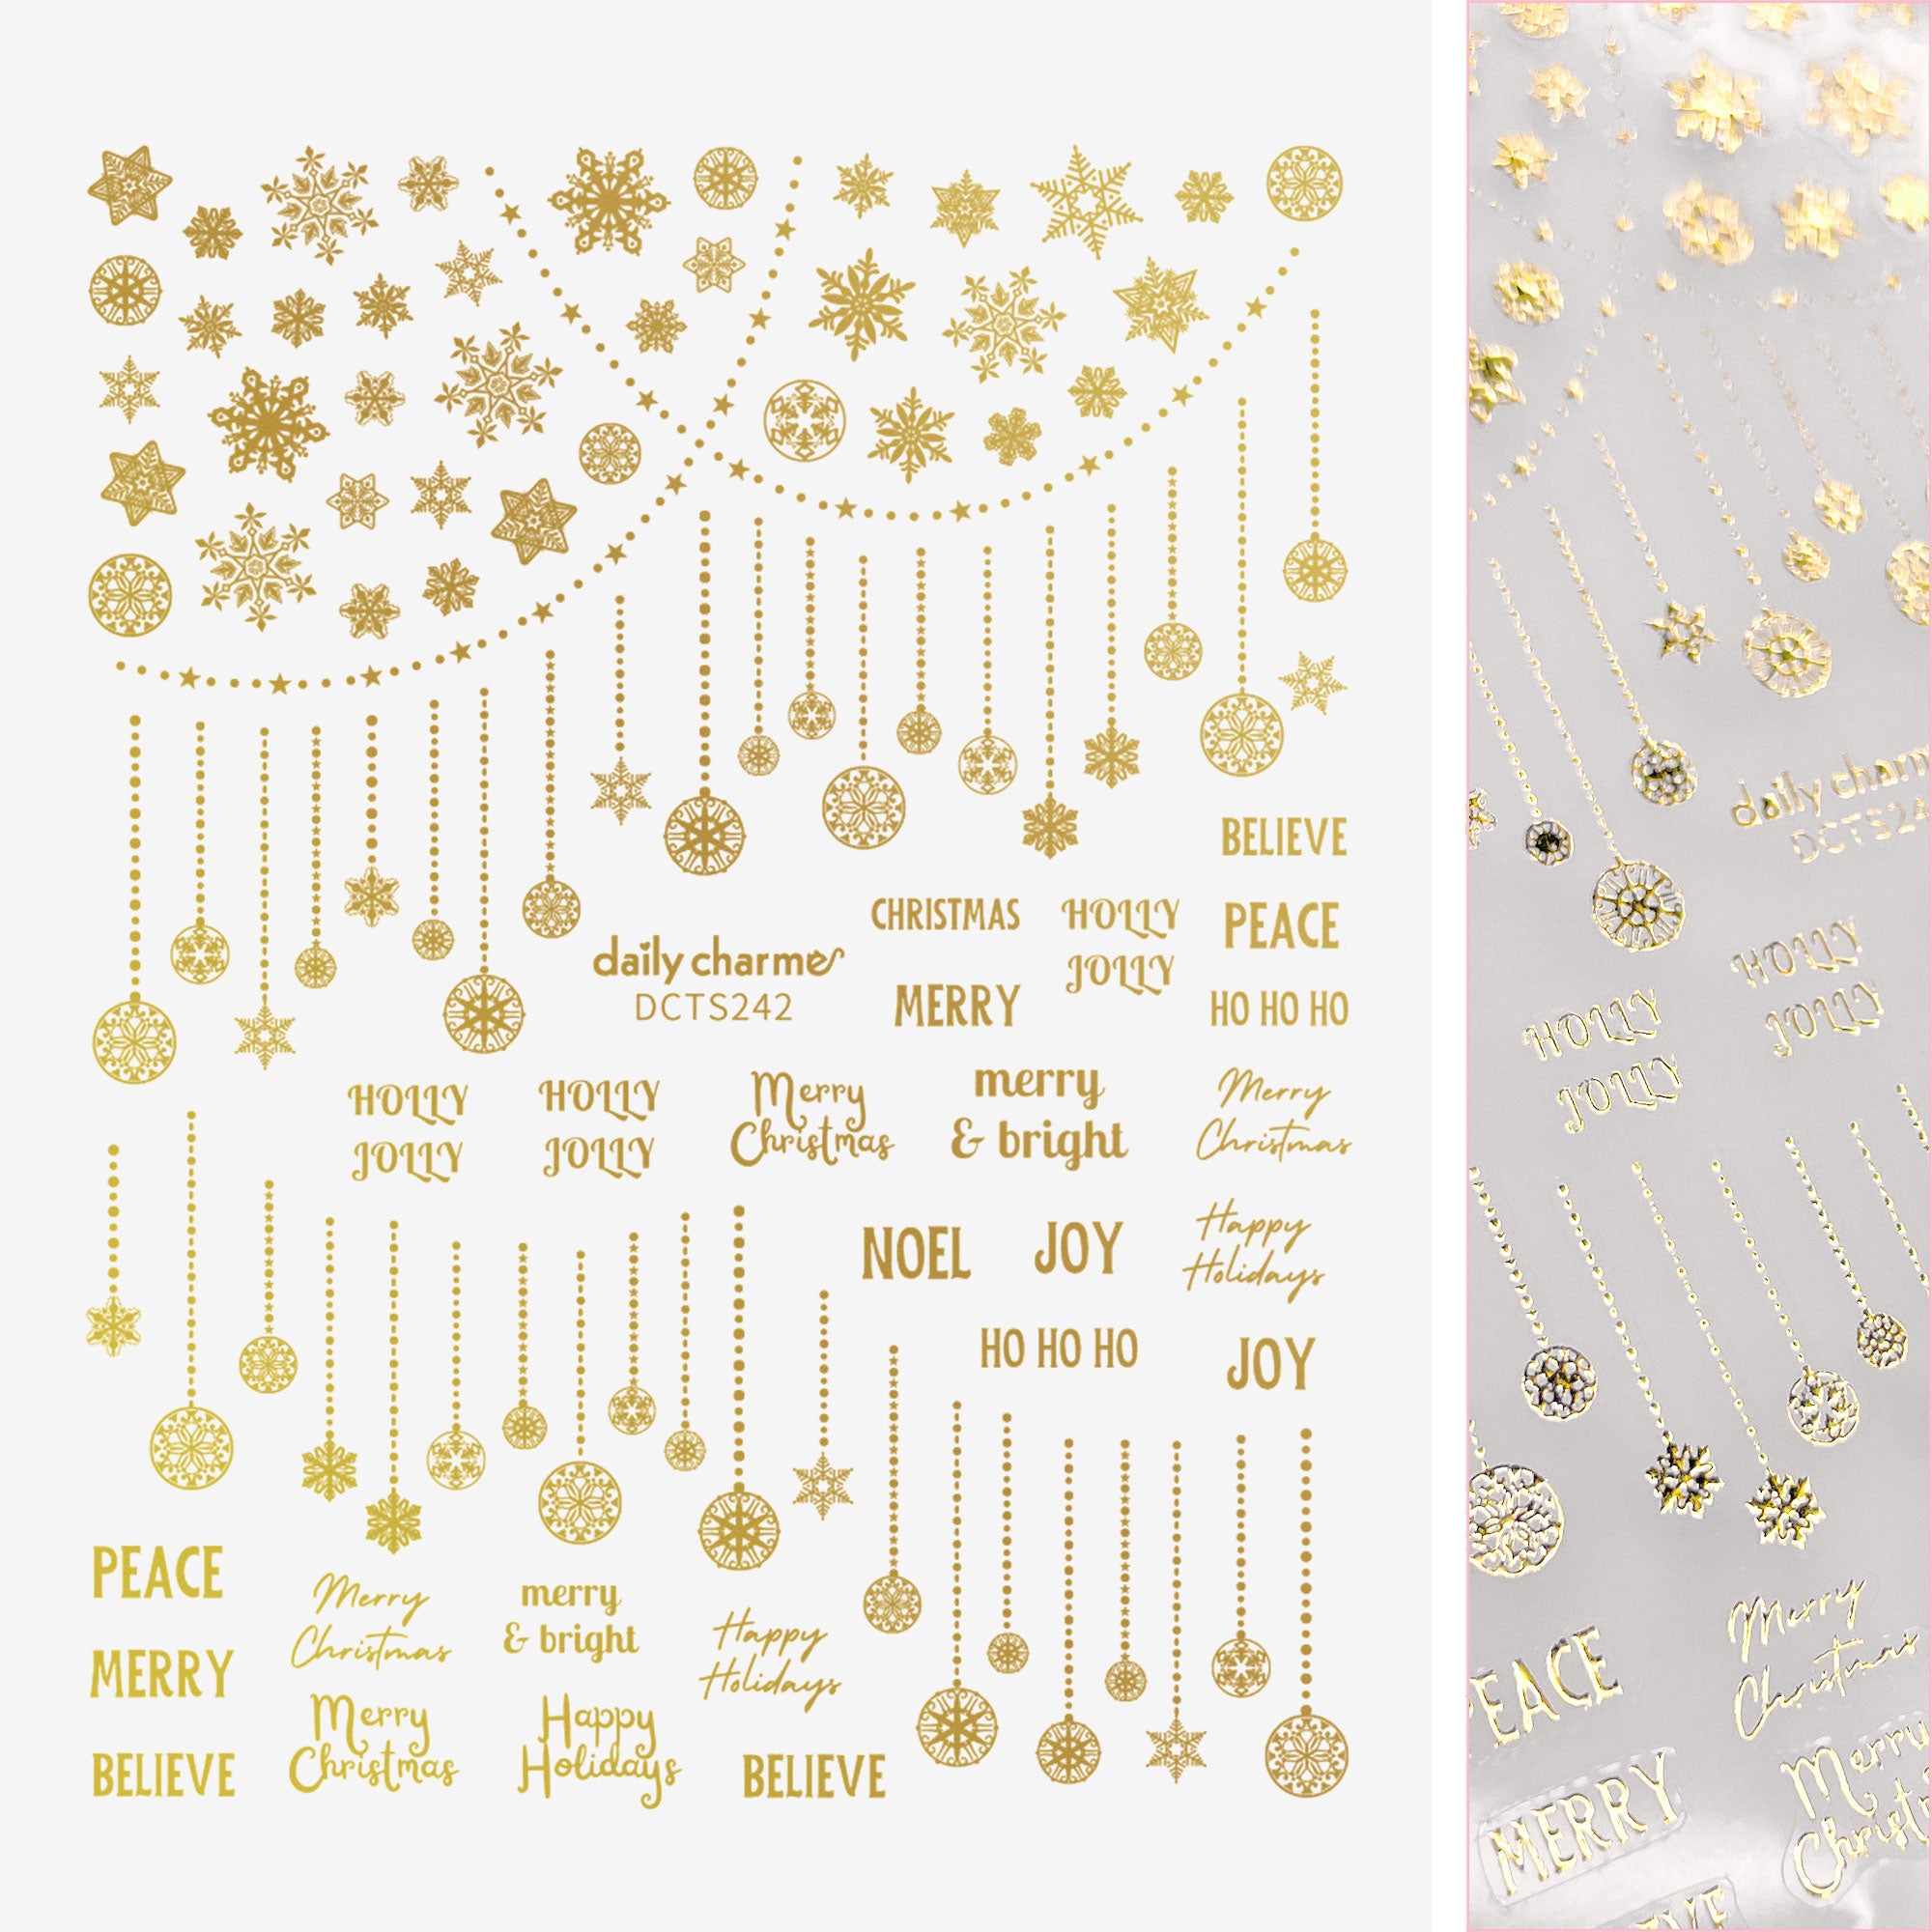 Holiday Festive Nail Art Sticker / Snowy Celebration / Gold Snowflakes Baubles Chains Christmas Greetings Decal